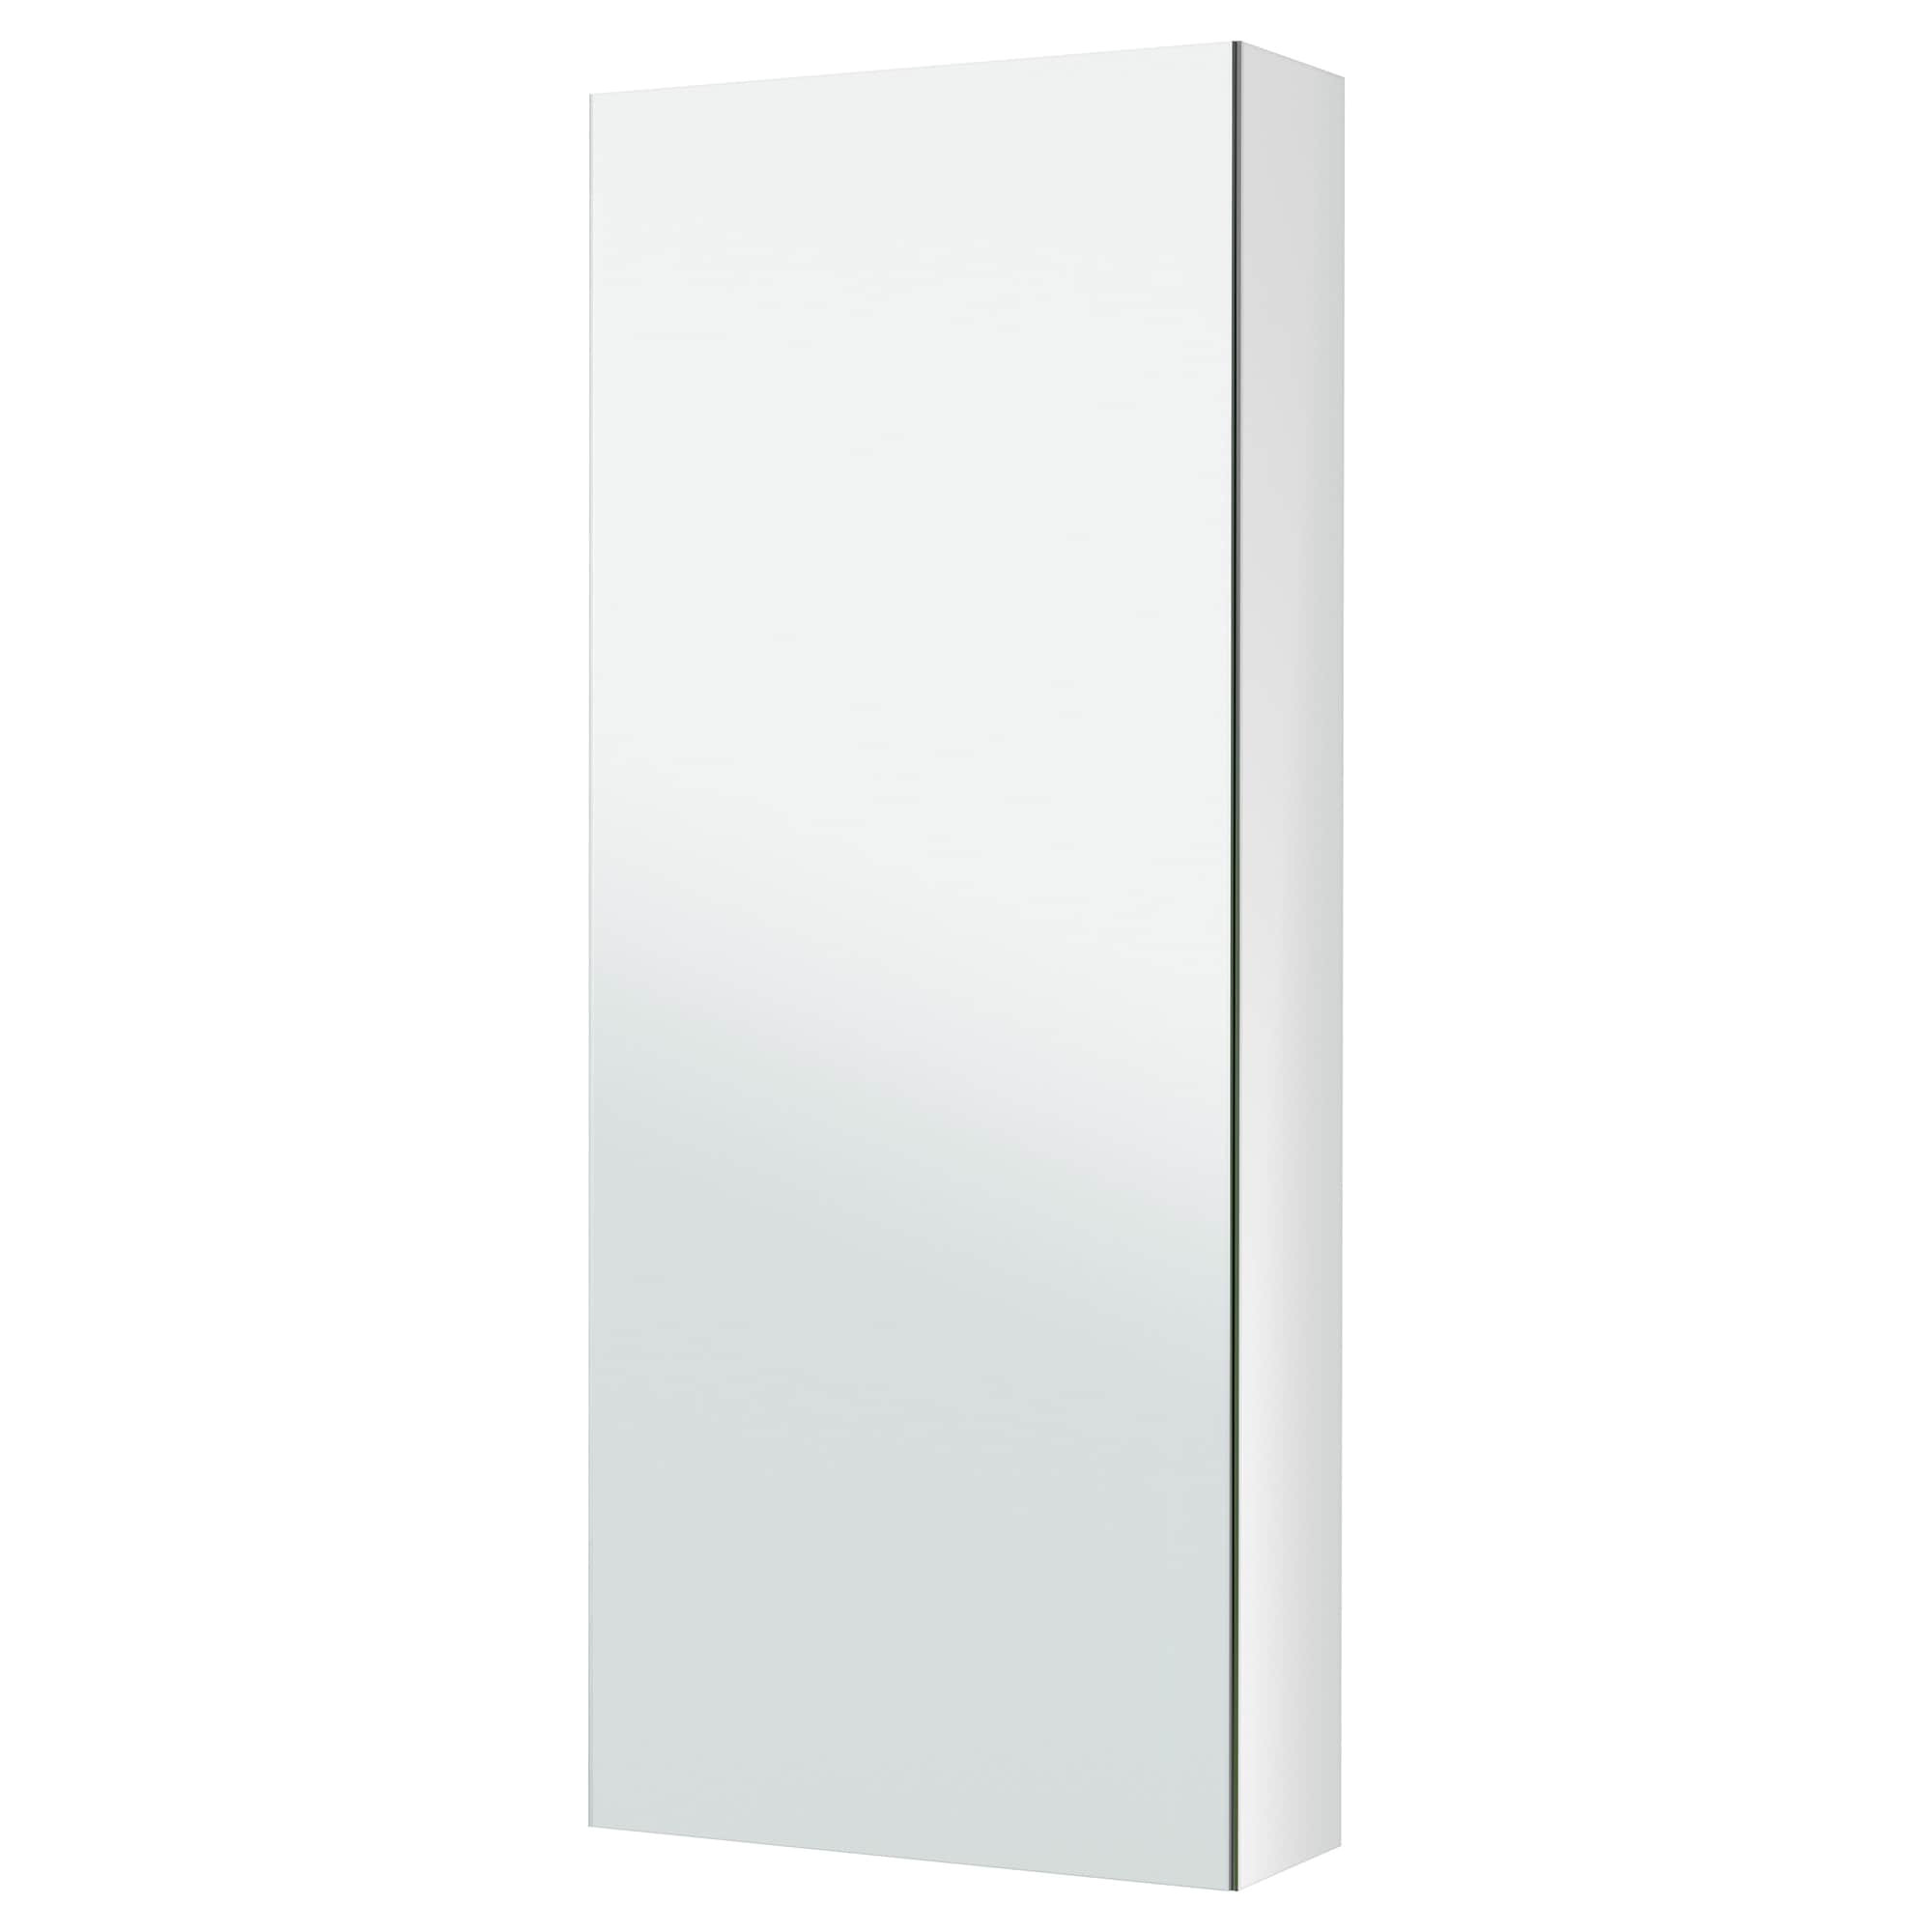 ikea godmorgon mirror cabinet with 1 door mirror both on the outside and the inside